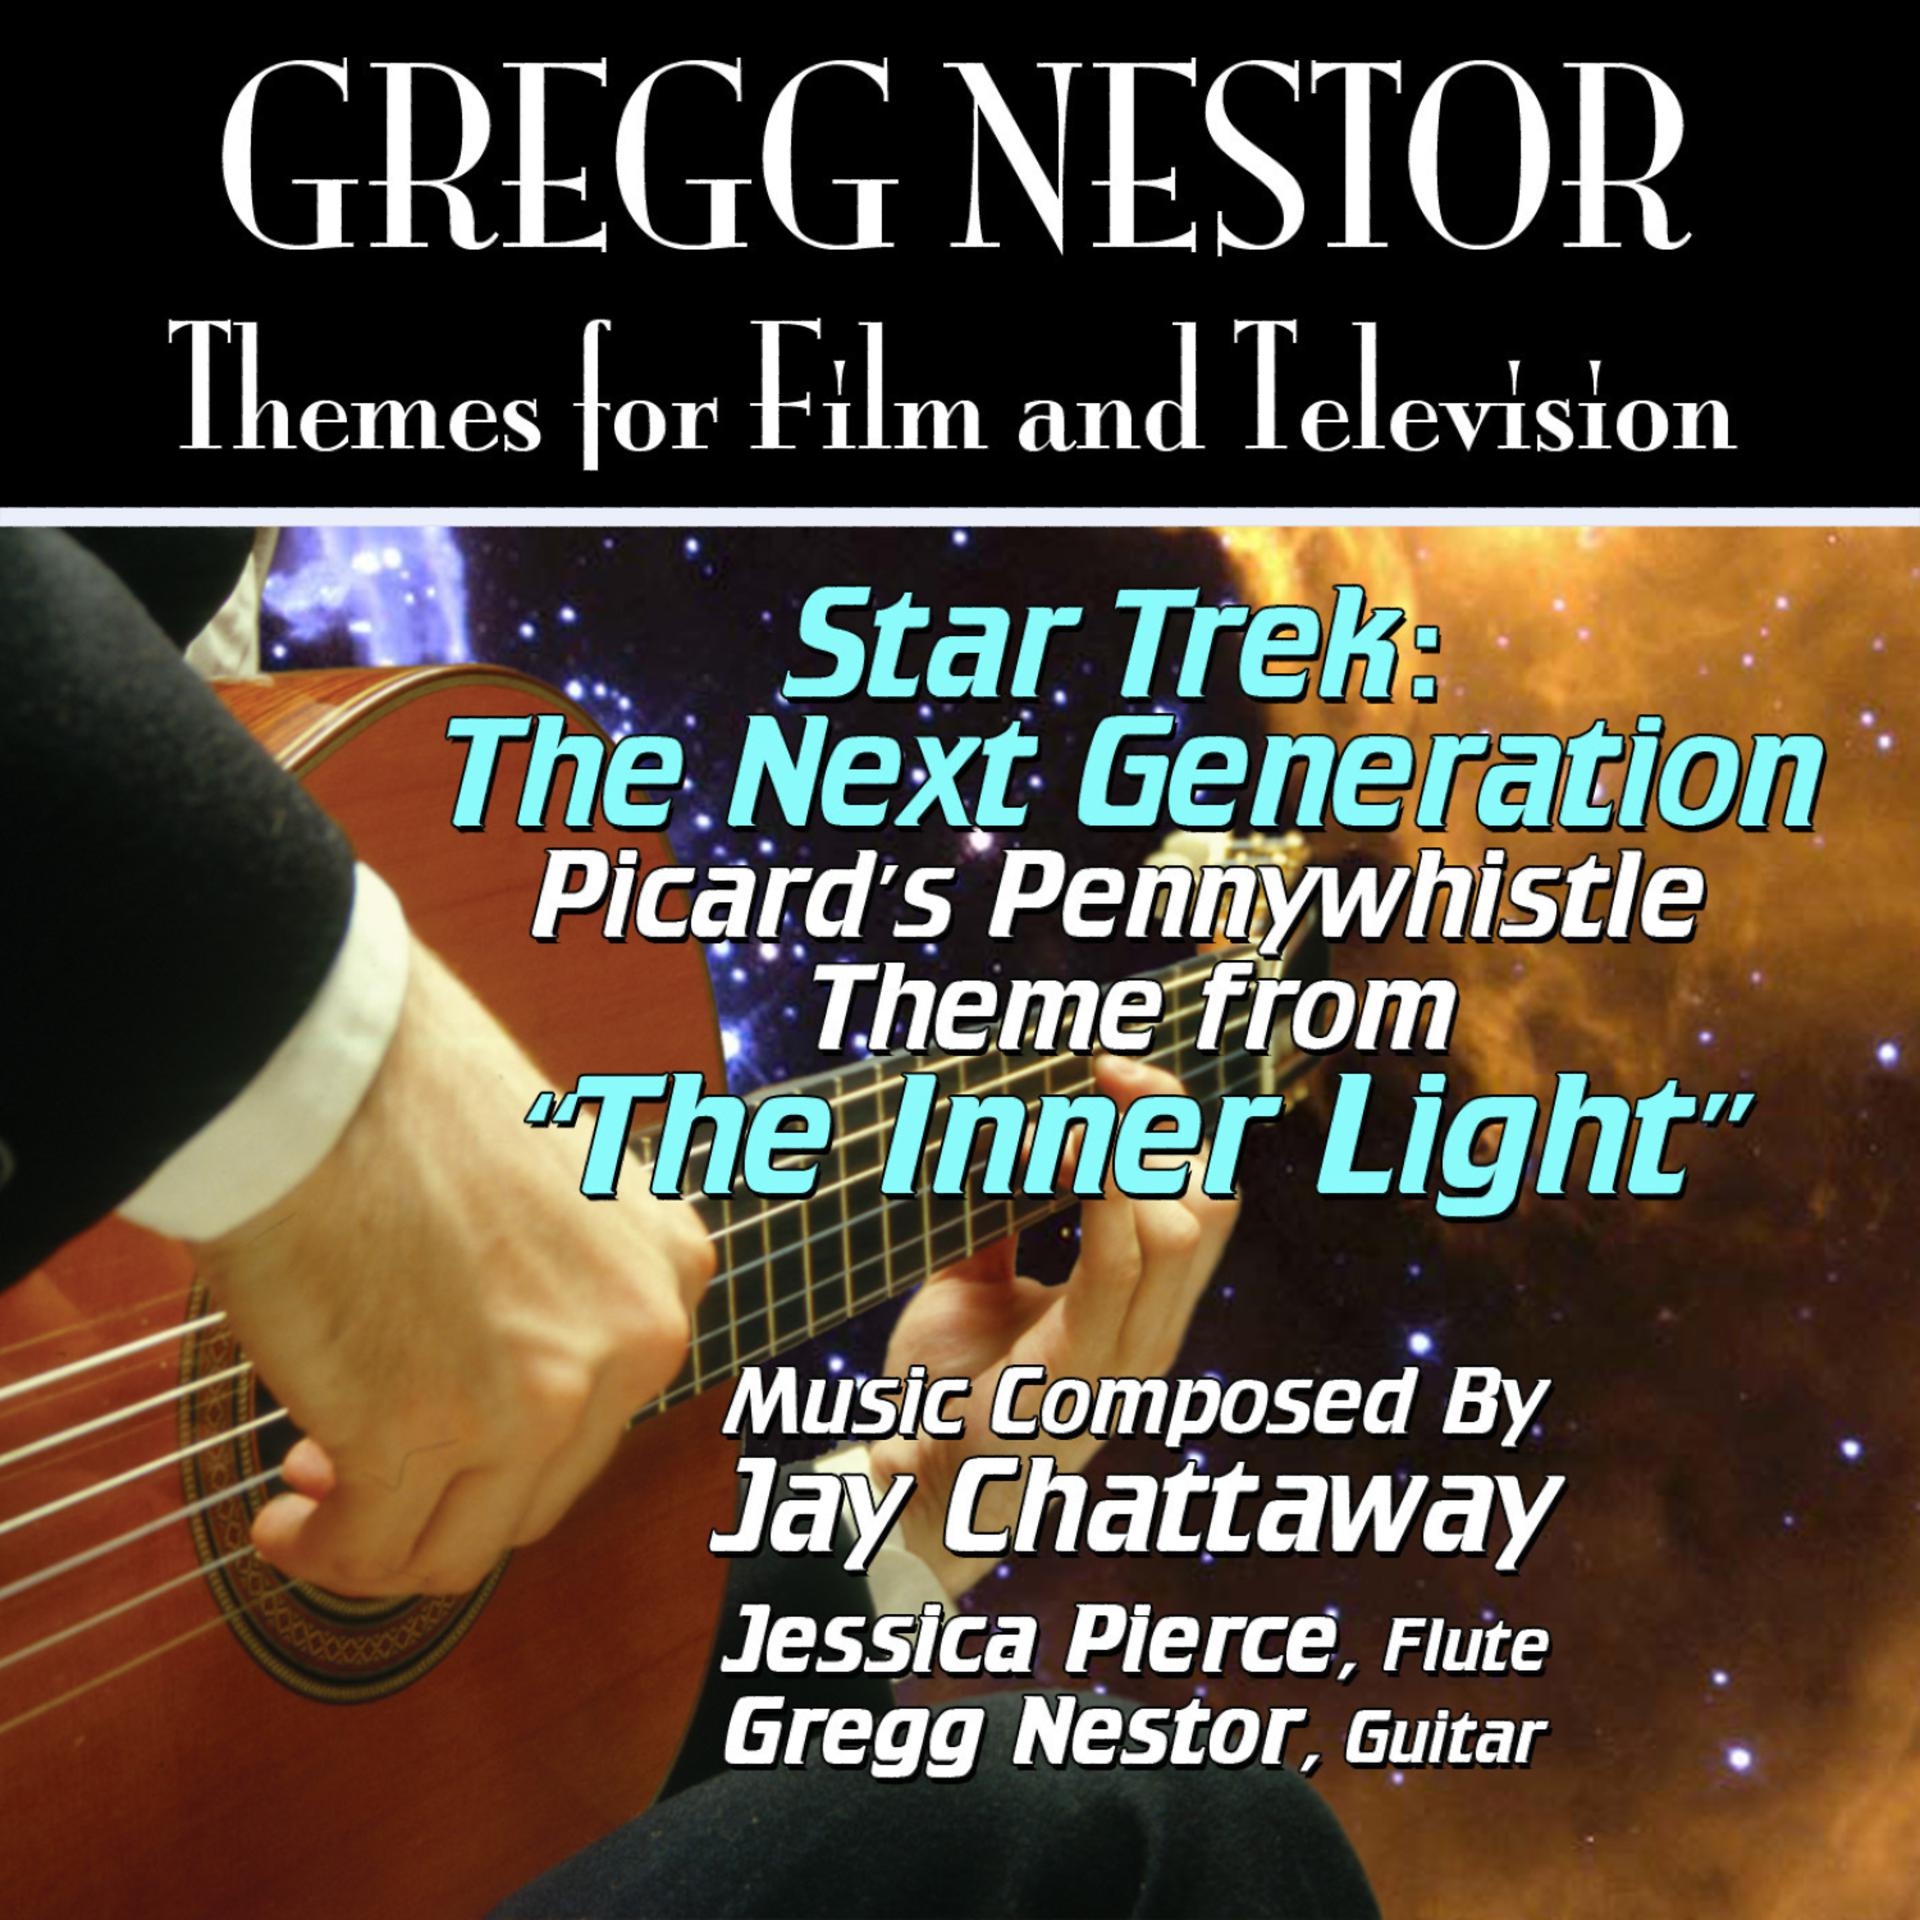 Постер альбома Star Trek: The Next Generation: "The Inner Light" Theme from the Television Series for Guitar and Flute (Jay Chattaway) Single